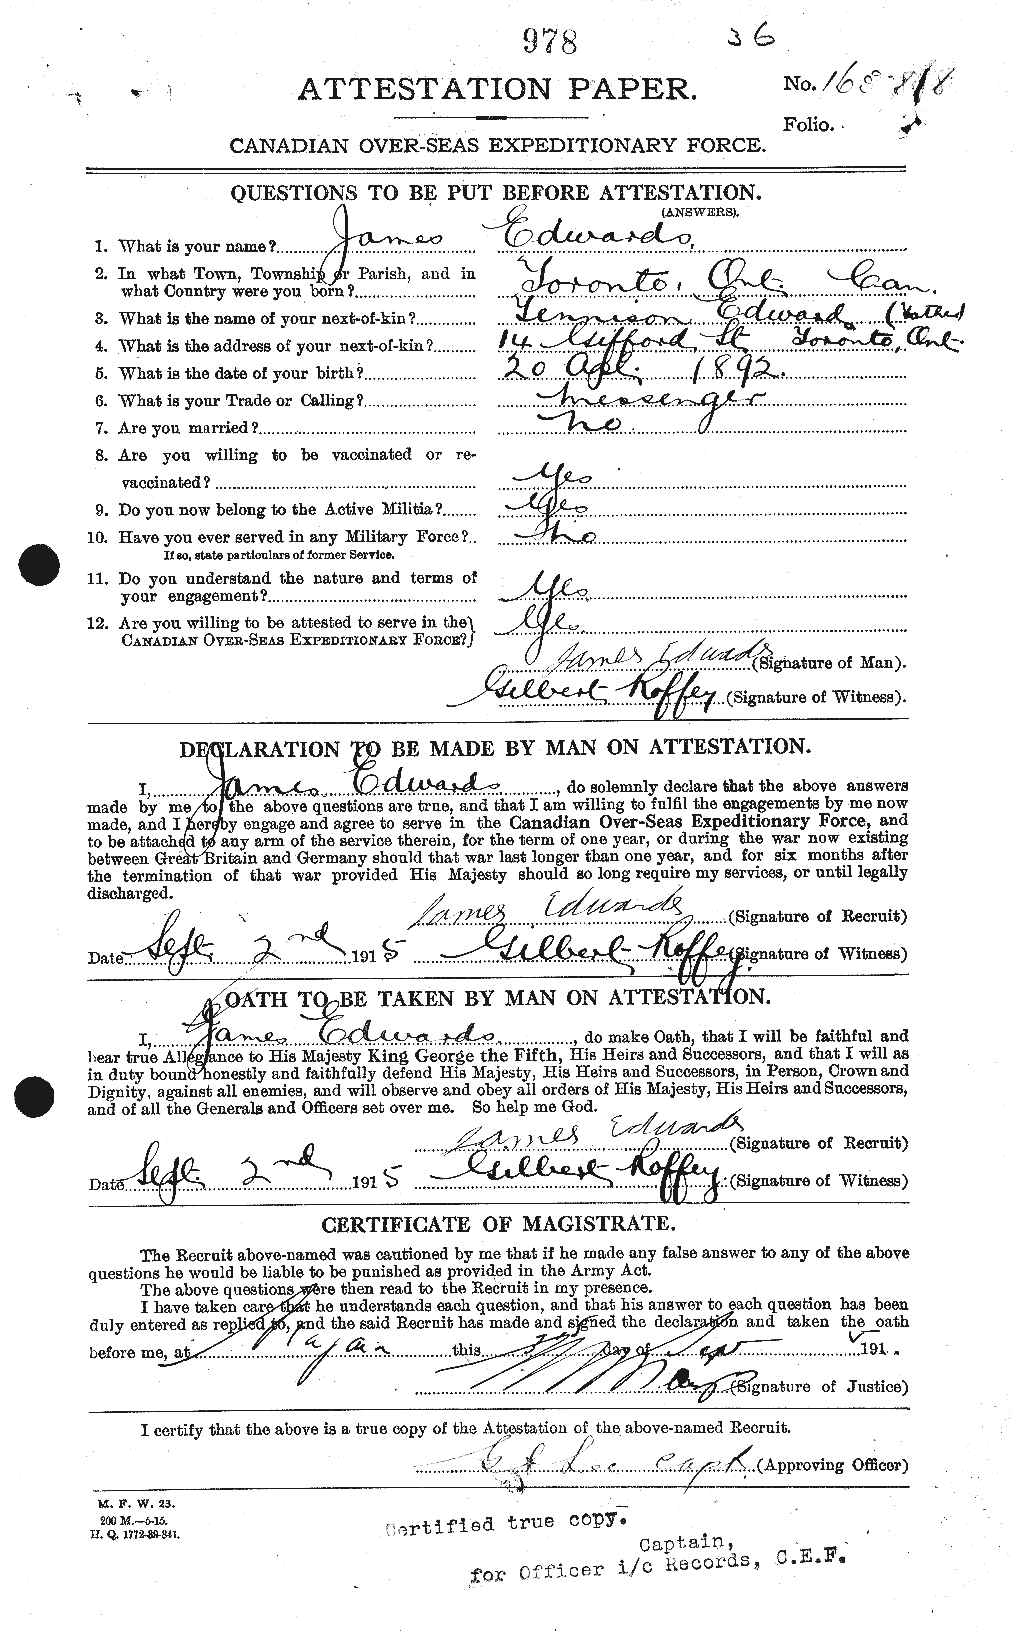 Personnel Records of the First World War - CEF 309802a